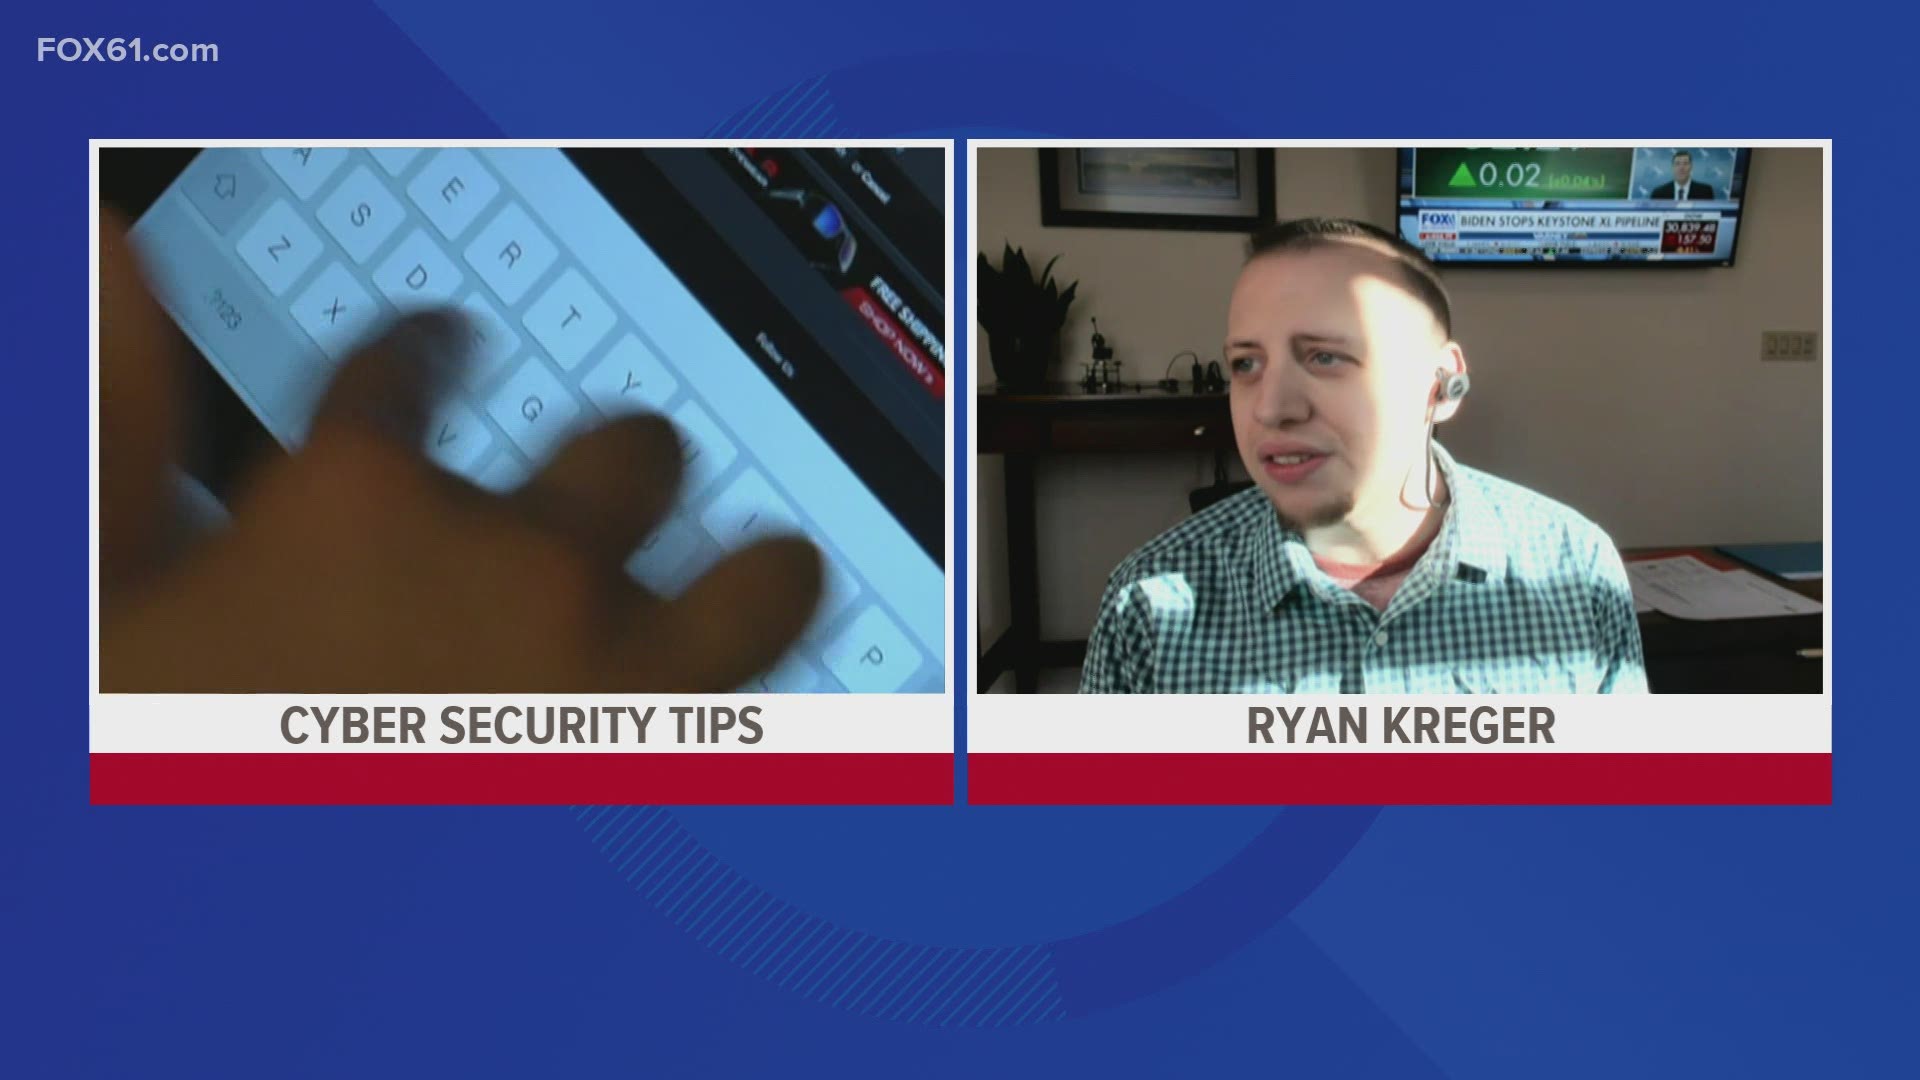 Ryan Kreger, VP and Managing Director of ASG Information Technologies tells us the steps and tips to take to protect ourselves online